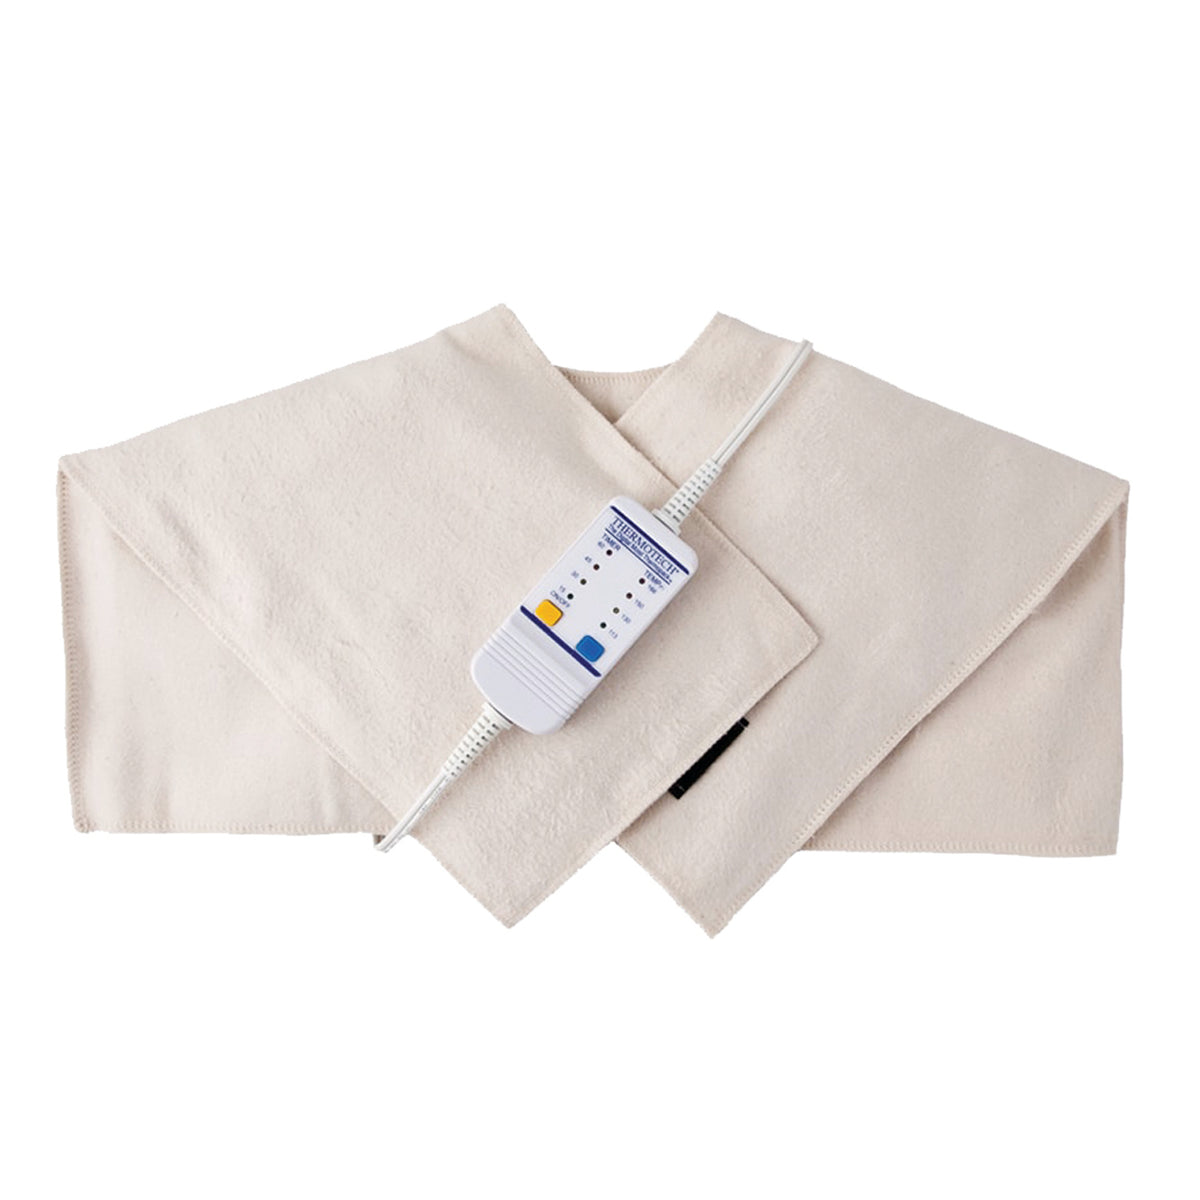 Neck & Shoulder Medical Grade Heating pad with Automatic Moist Heat 18" x 17"